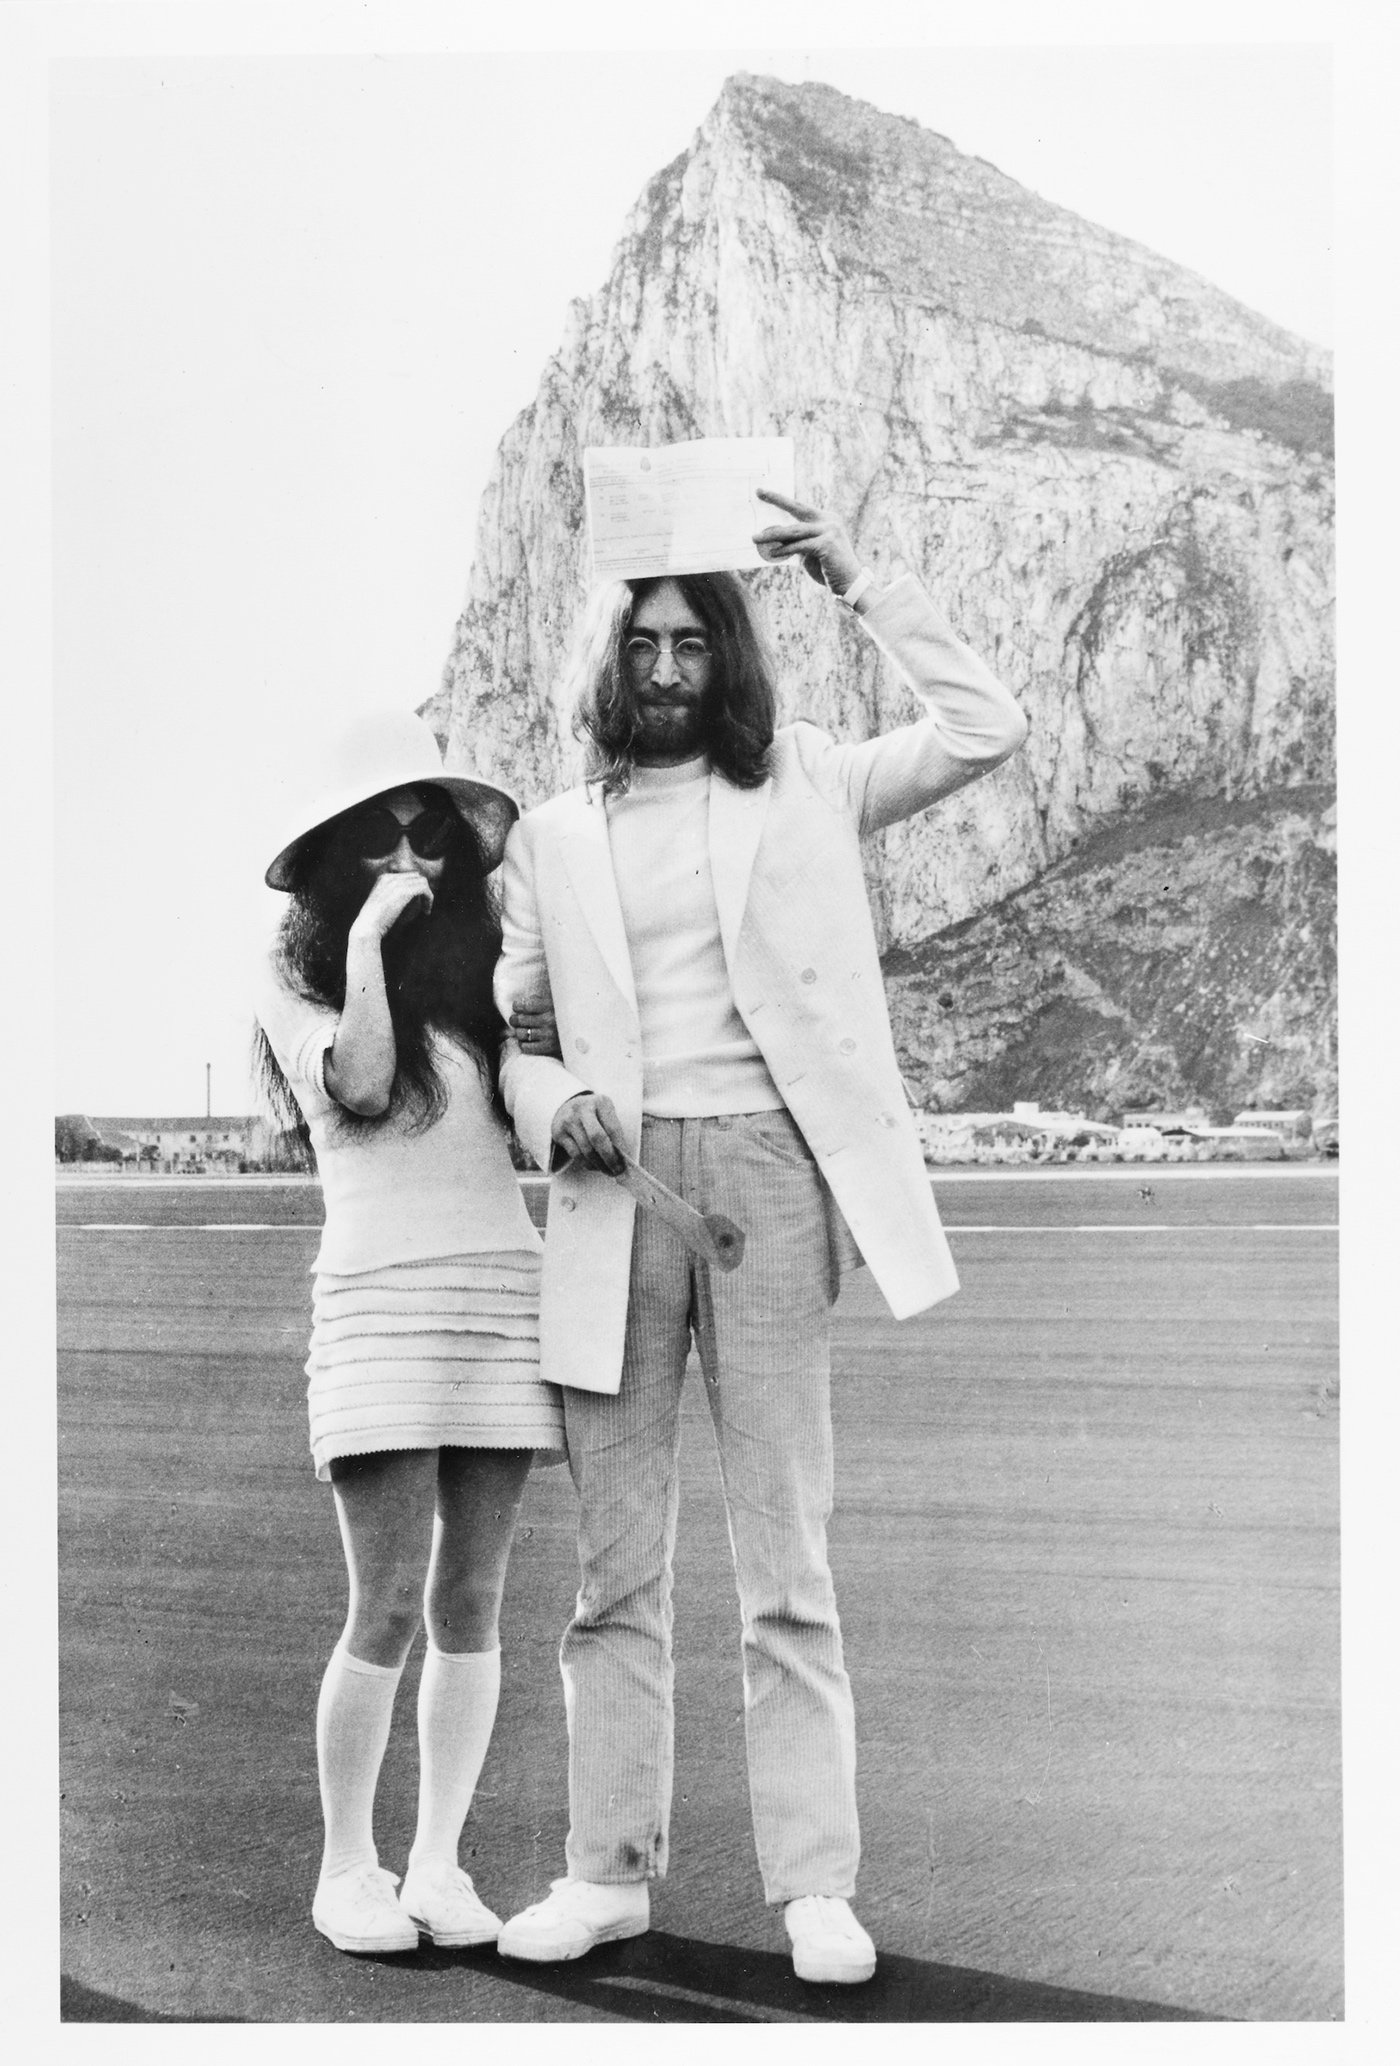 Yoko Ono on X: The WAR IS OVER! campaign was once a tiny seed, which  spread and covered the Earth. John and I believed it helped many people to  stop their wars.